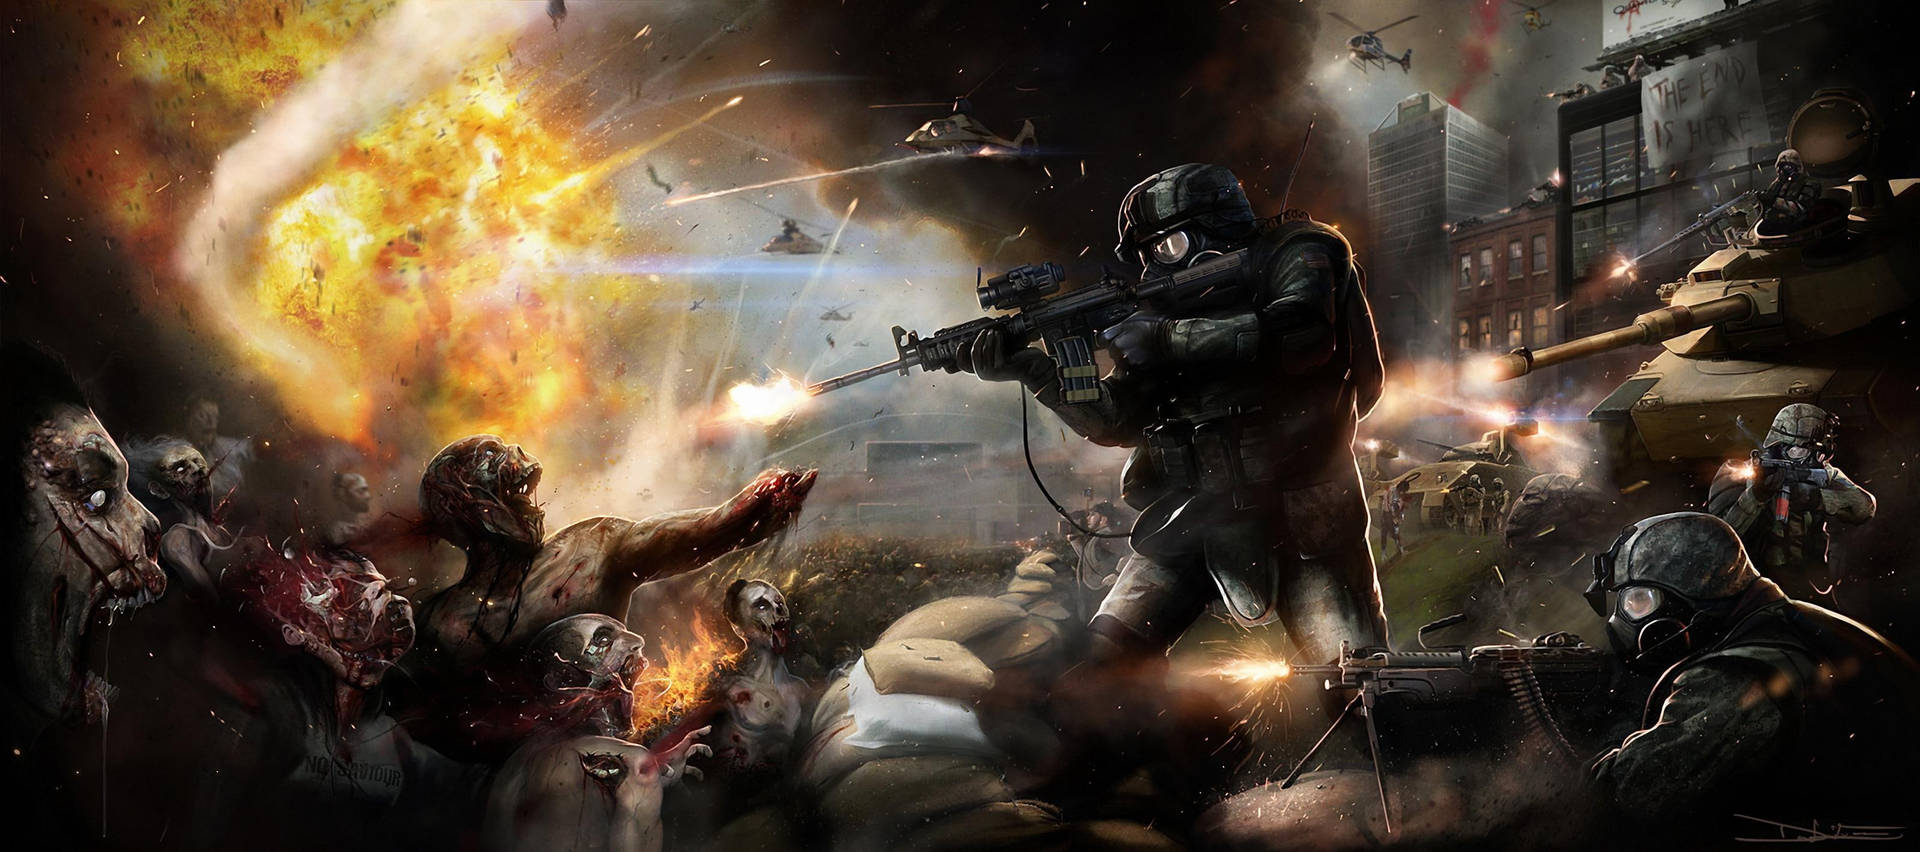 World War Z Game Soldiers Vs Zombies Wallpaper